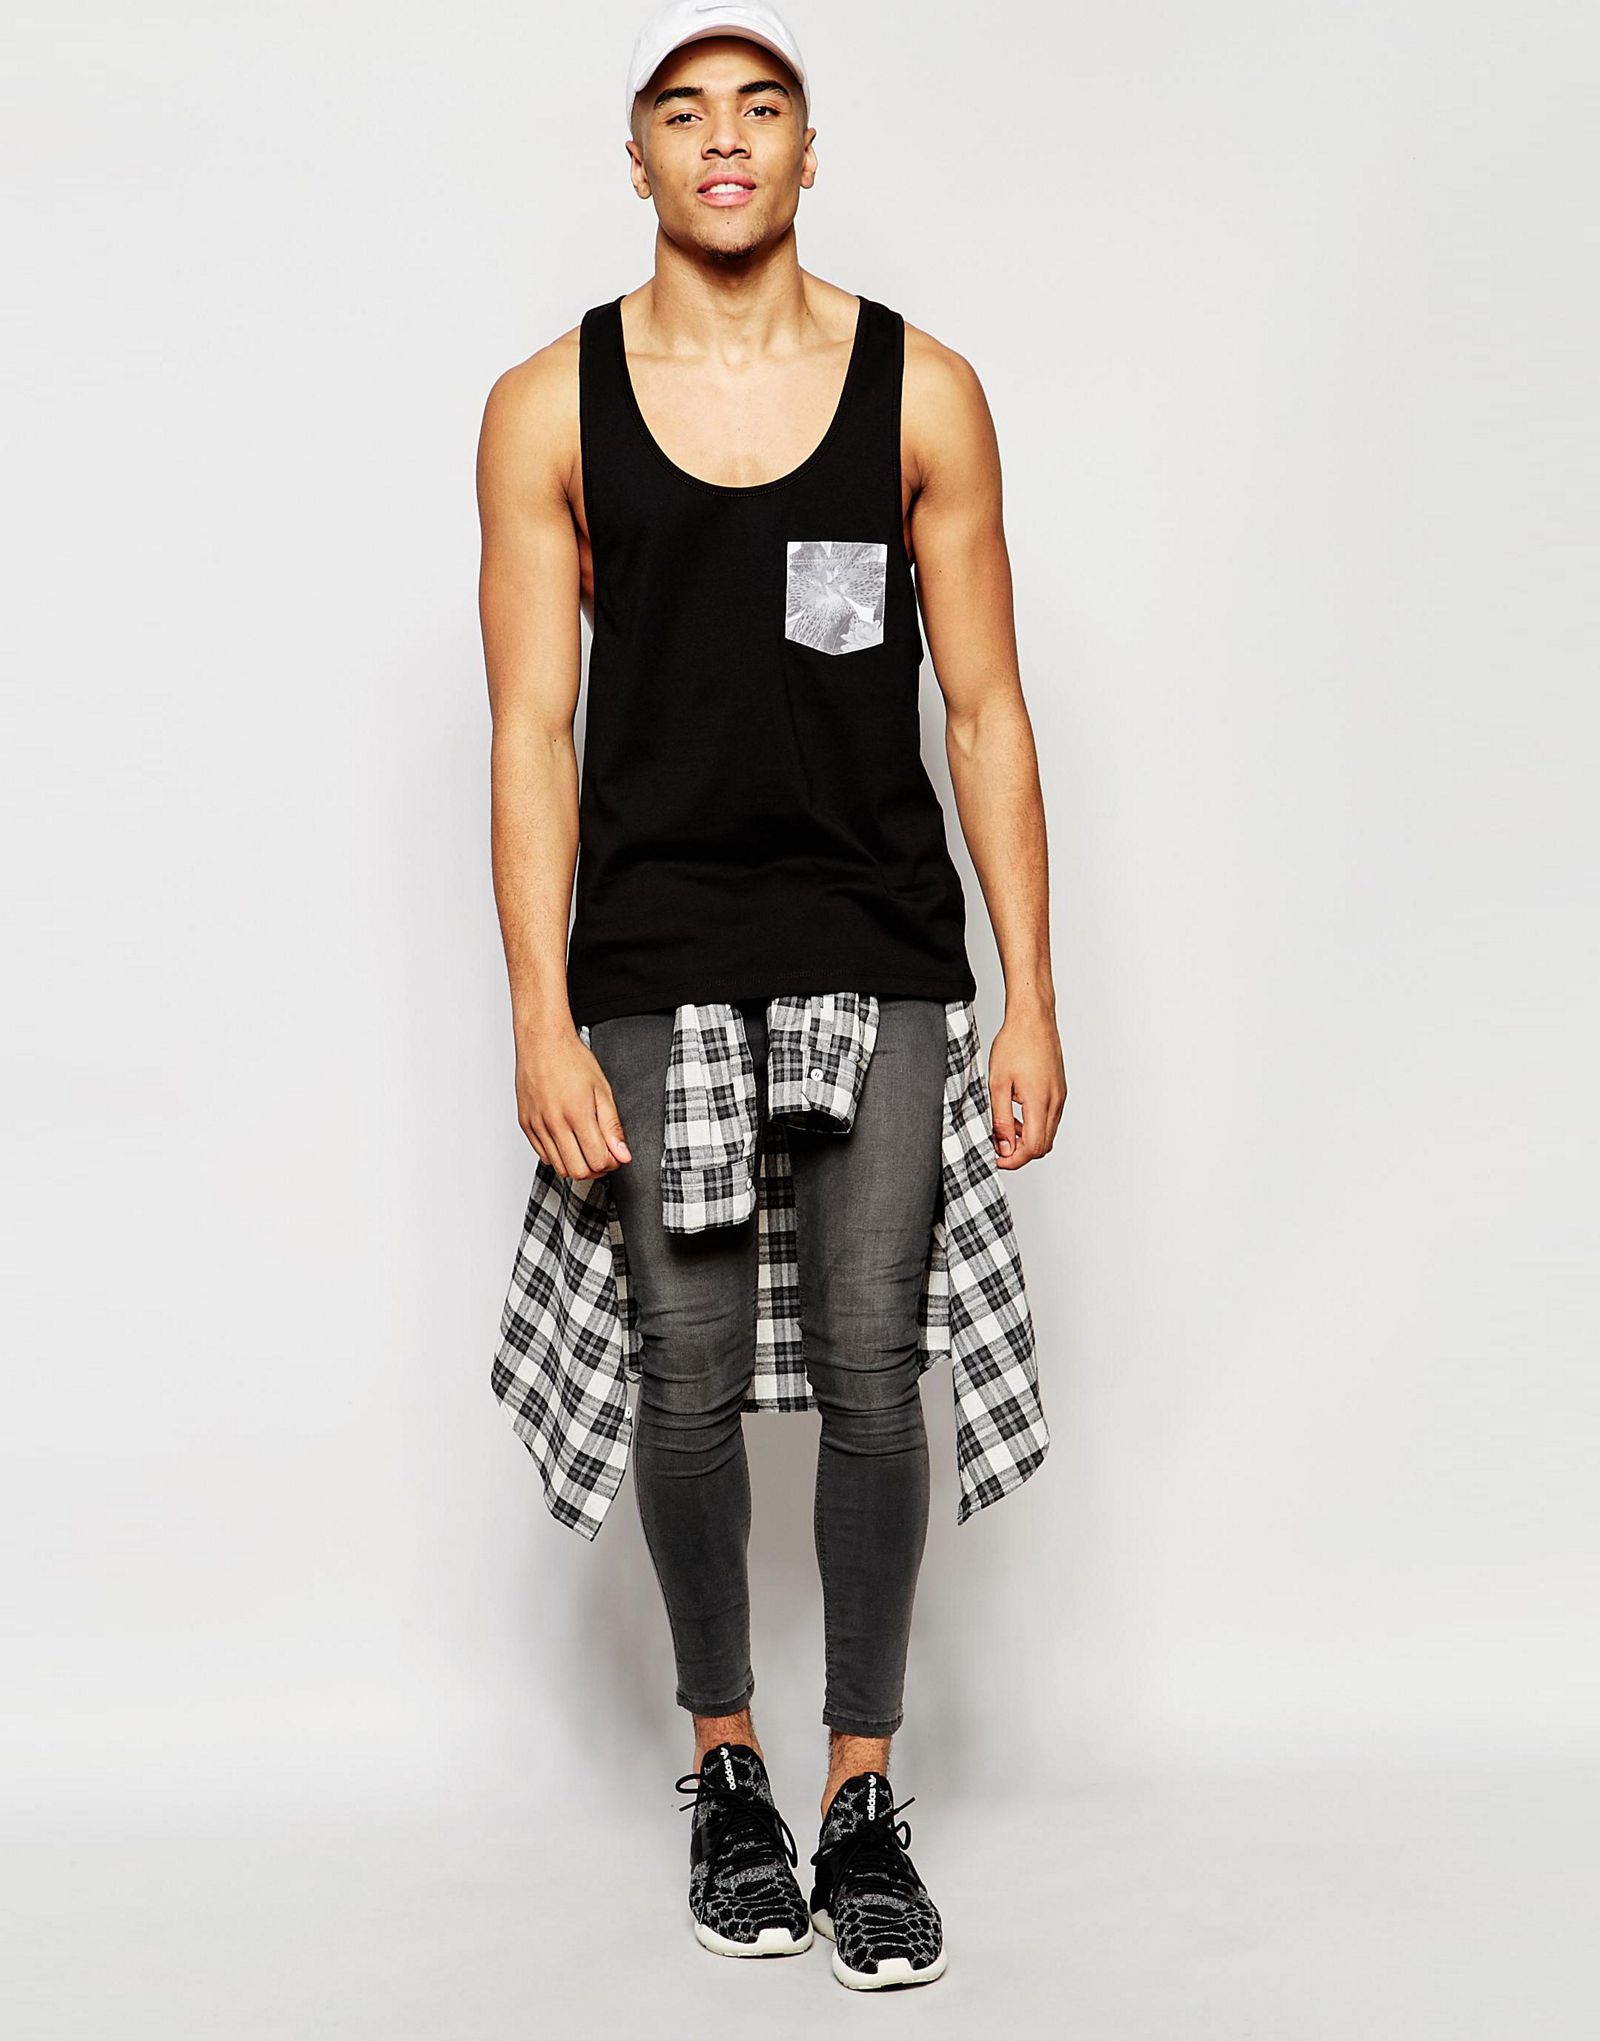 ASOS Vest In Plain And Floral Print 3 Pack SAVE 13%